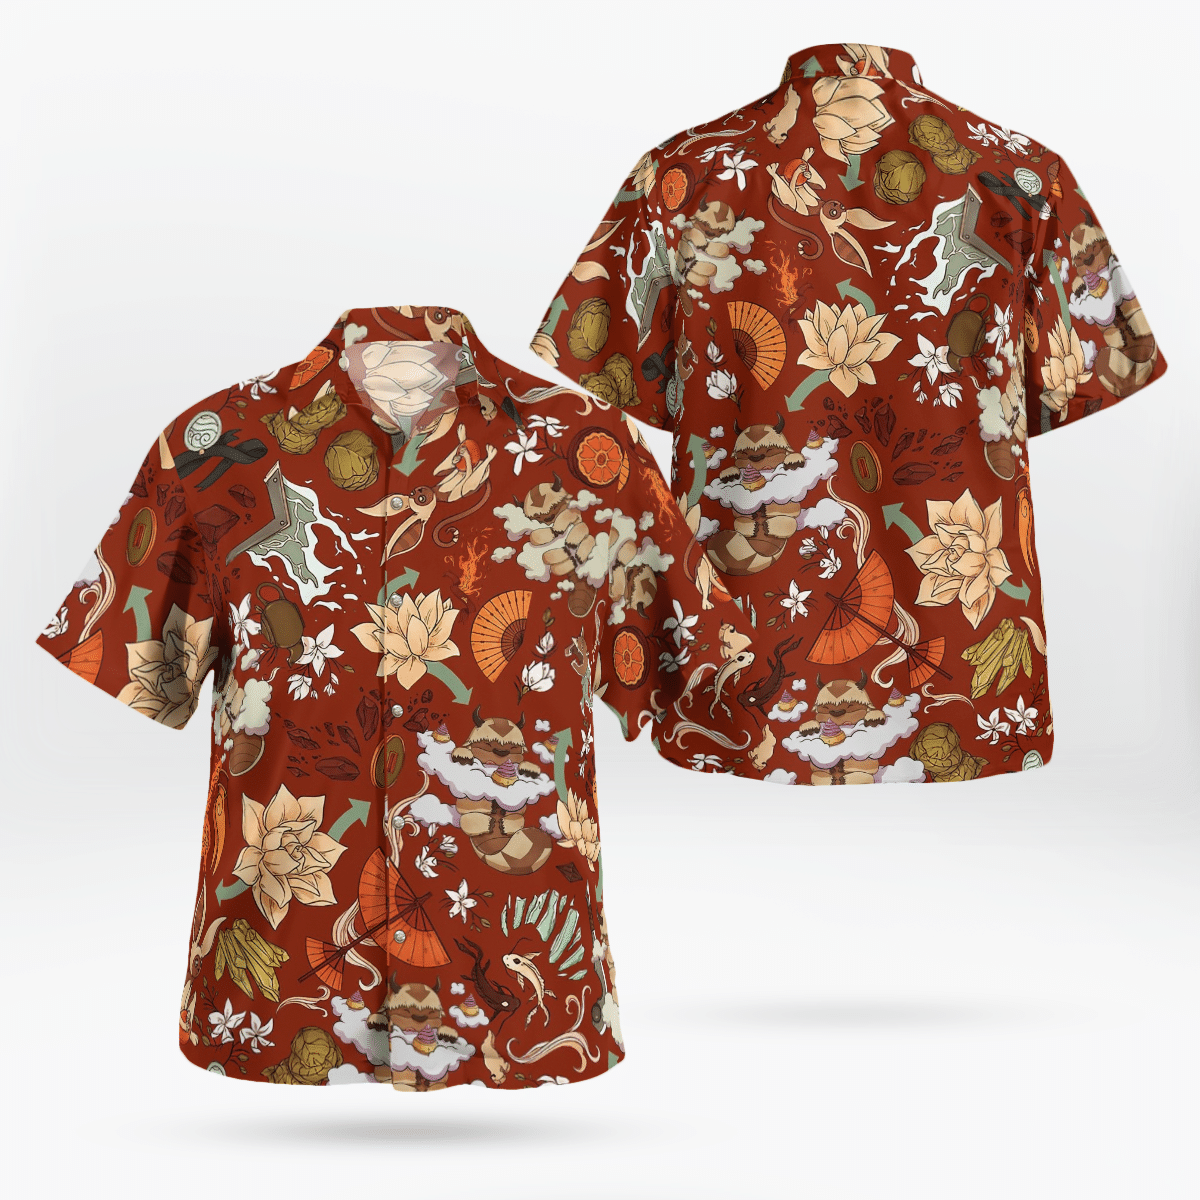 Appa And Momo Pattern Beach Outfit Aloha Shirt For Men Women Kid - HomeFavo